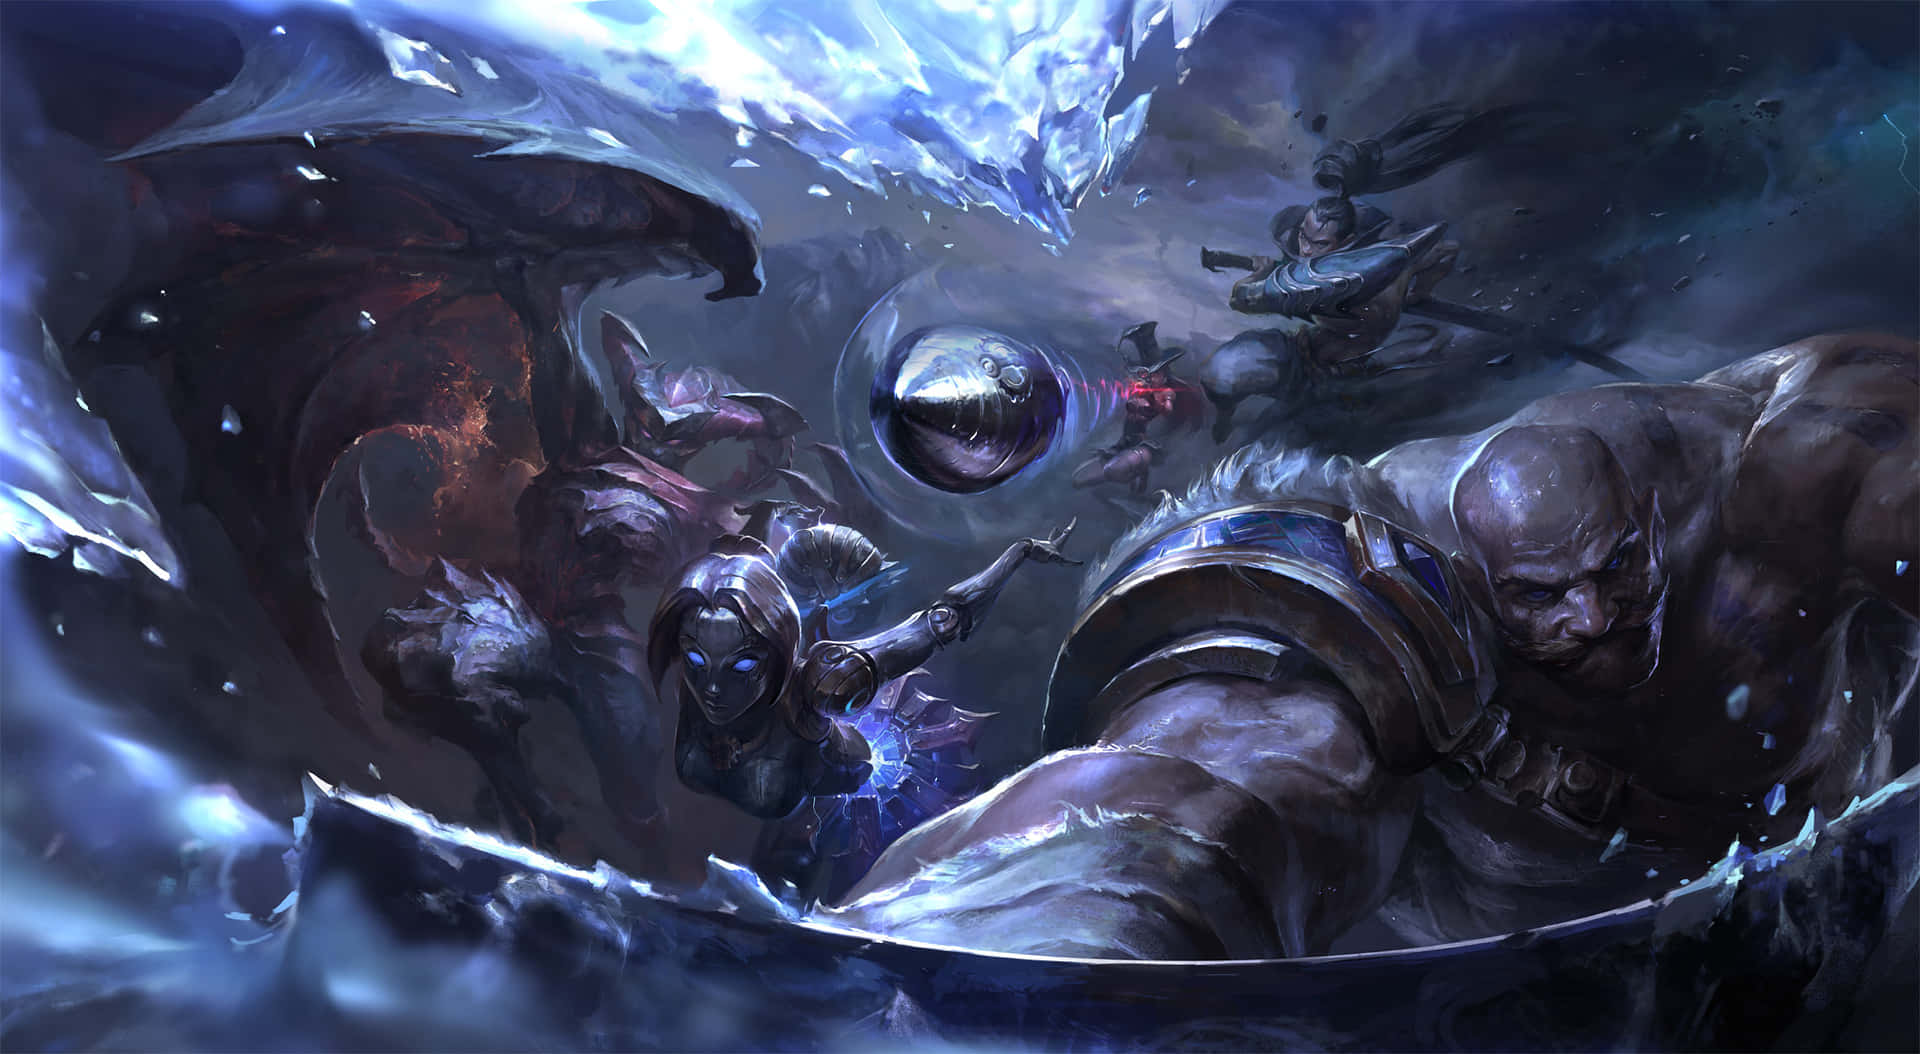 Take your gaming experience to a whole new level with this League of Legends laptop! Wallpaper